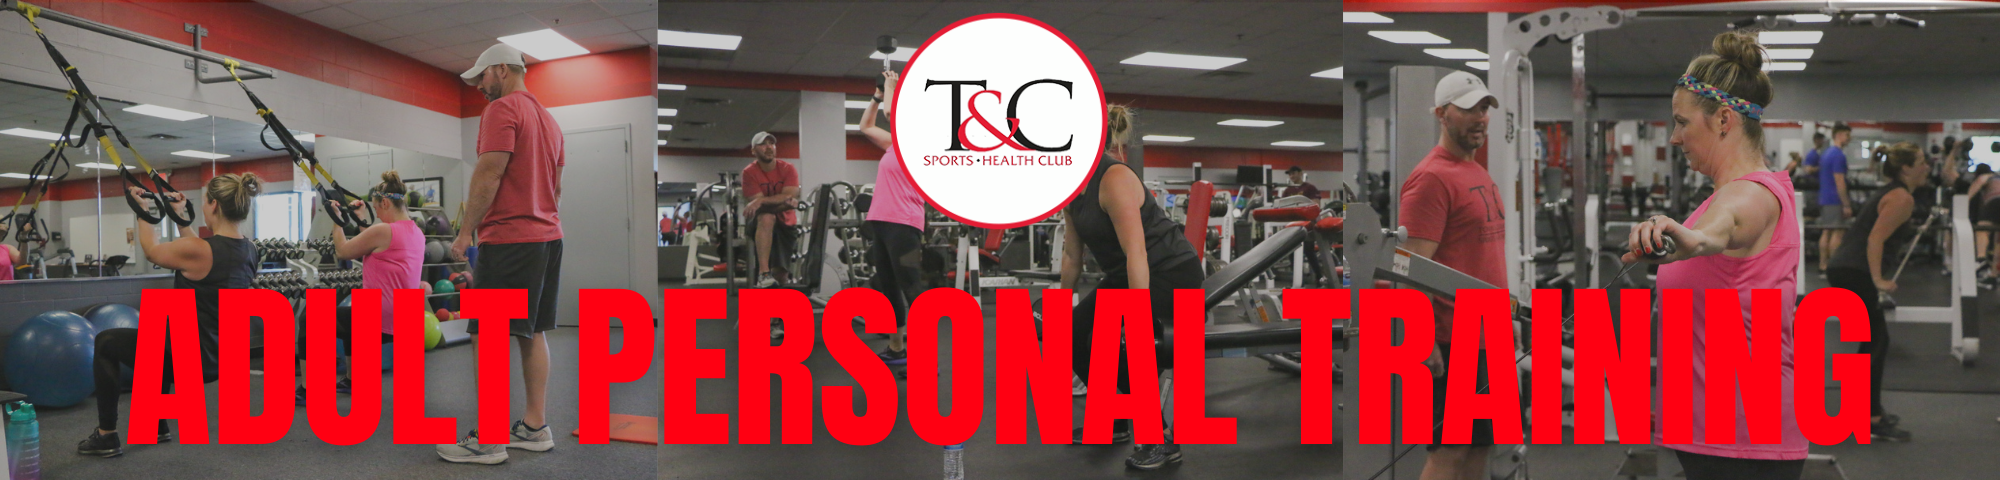 personal training banner